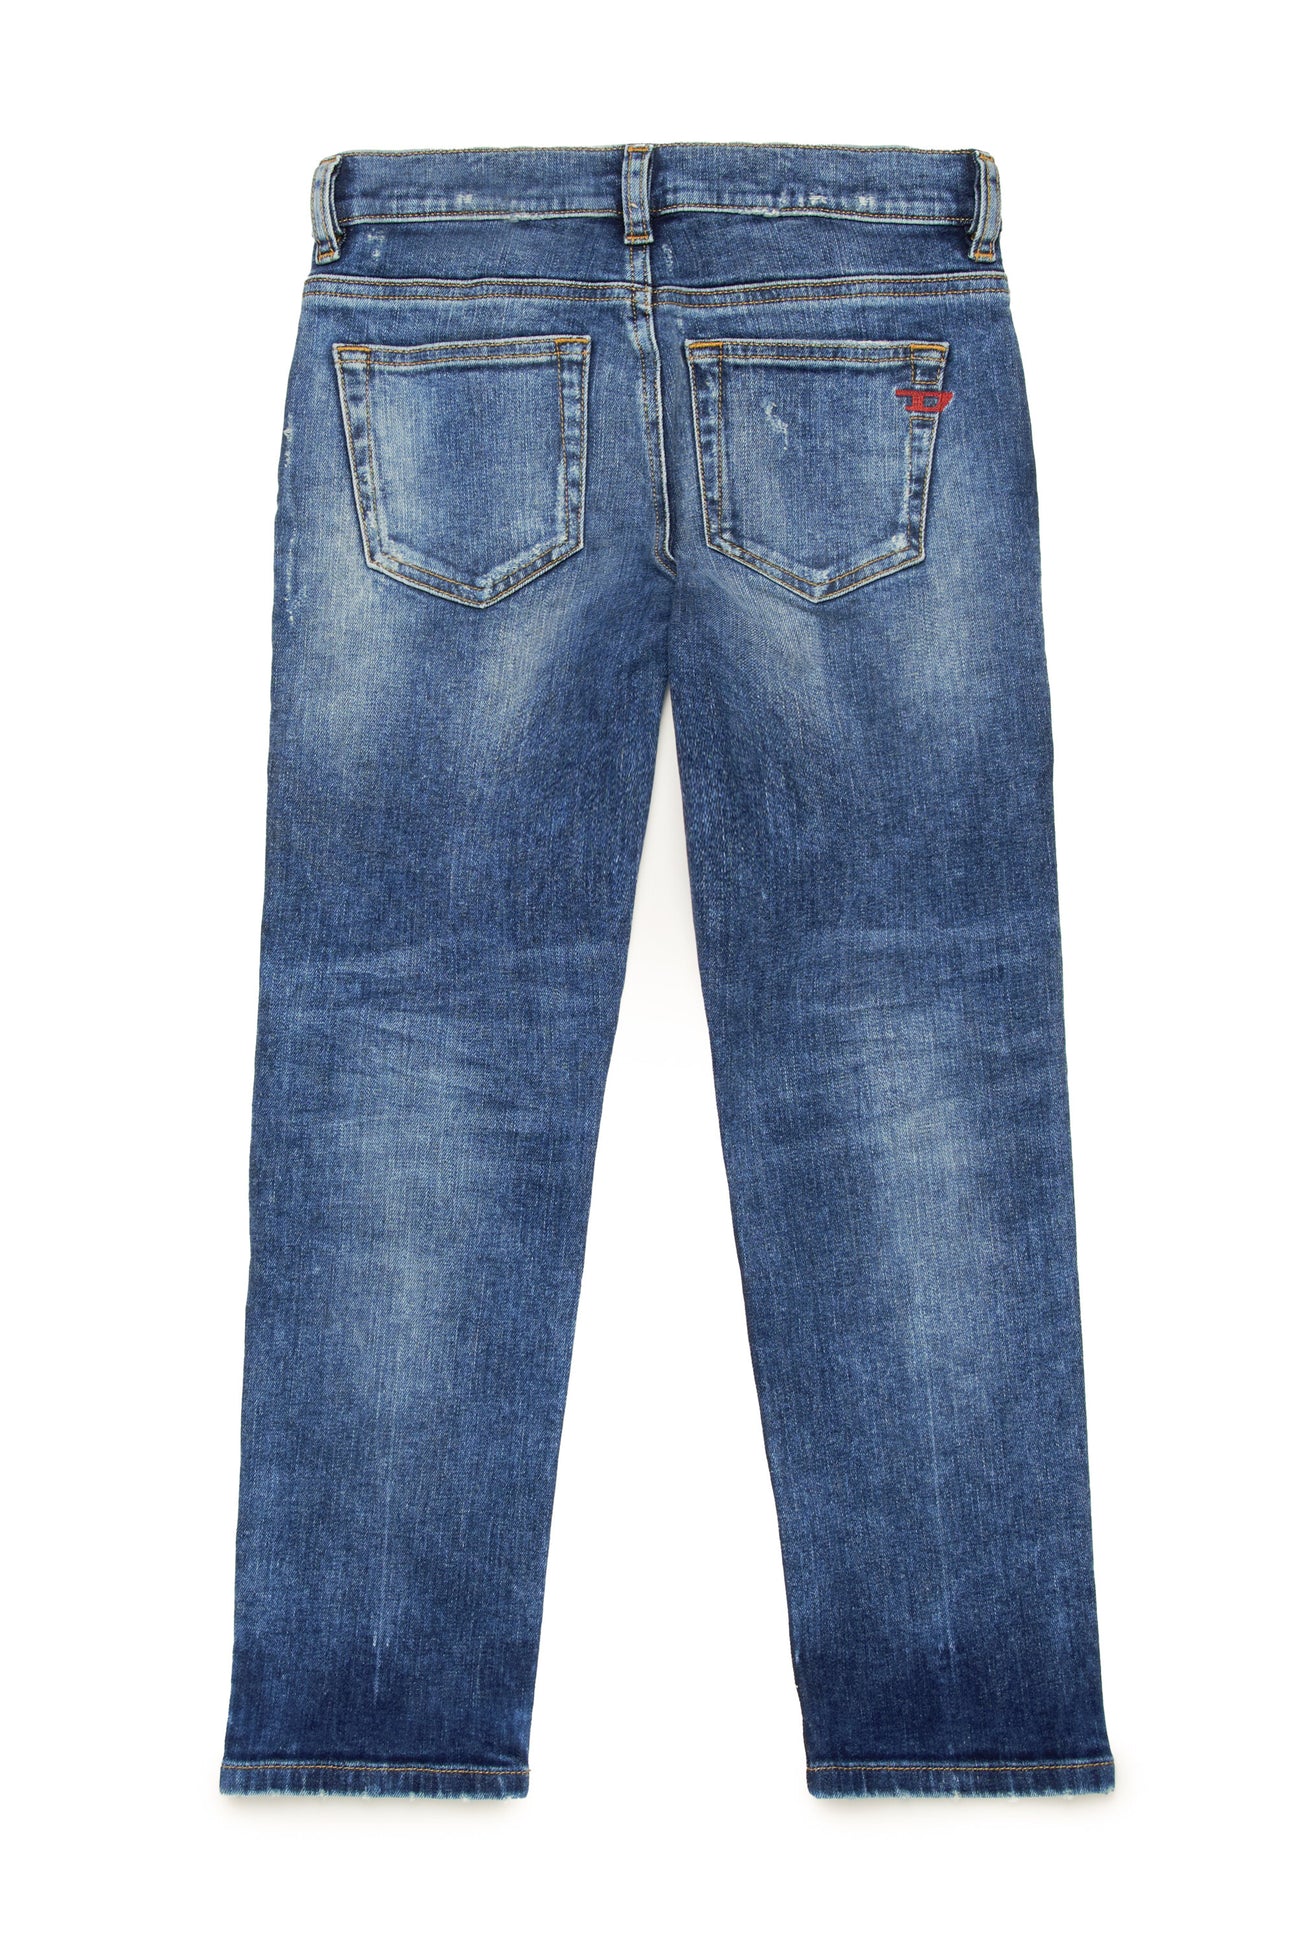 Mid blue straight jeans with rips - 2020 D-Viker Mid blue straight jeans with rips - 2020 D-Viker